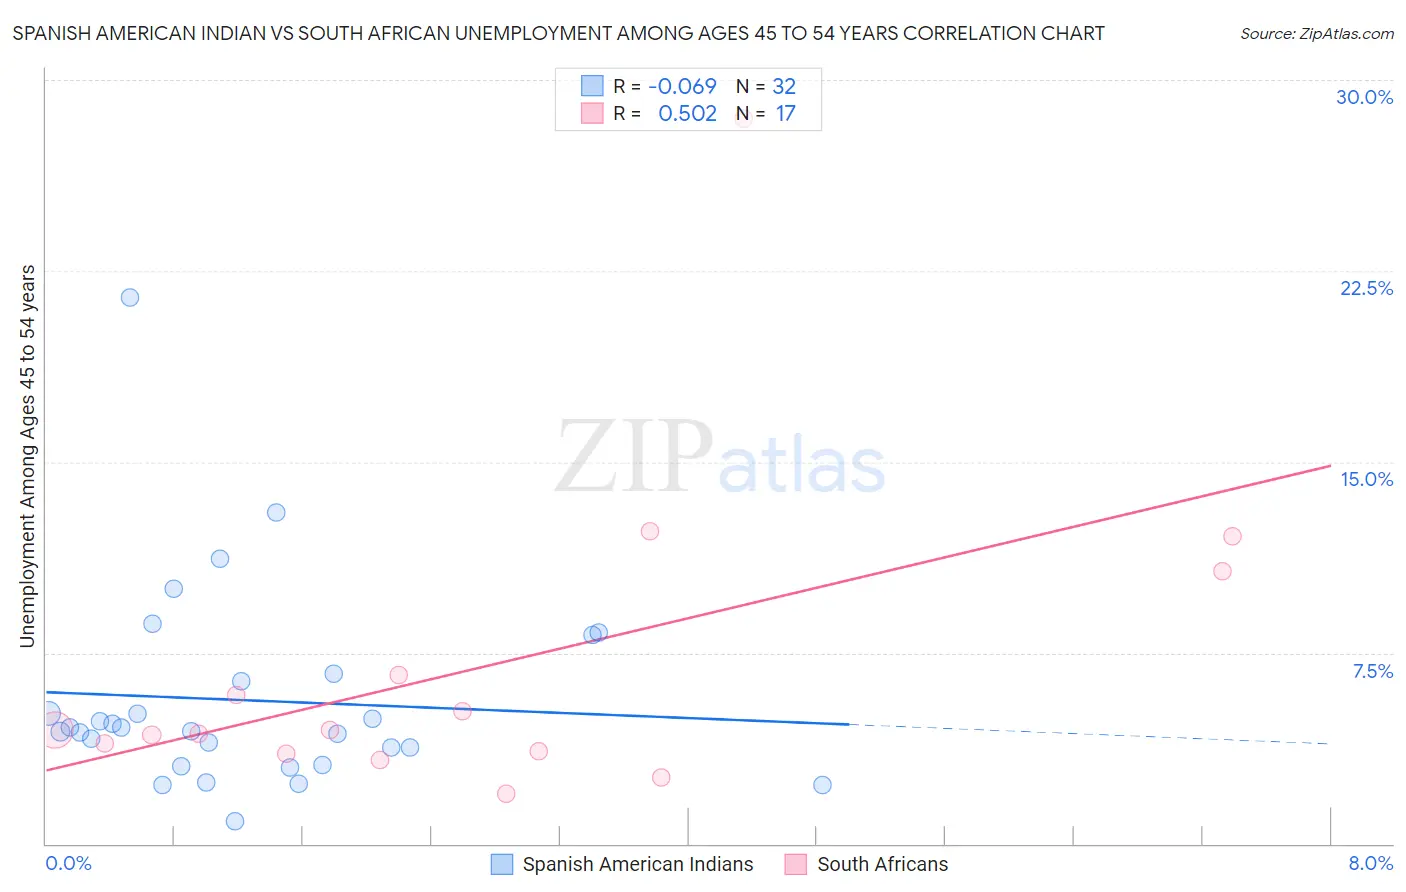 Spanish American Indian vs South African Unemployment Among Ages 45 to 54 years